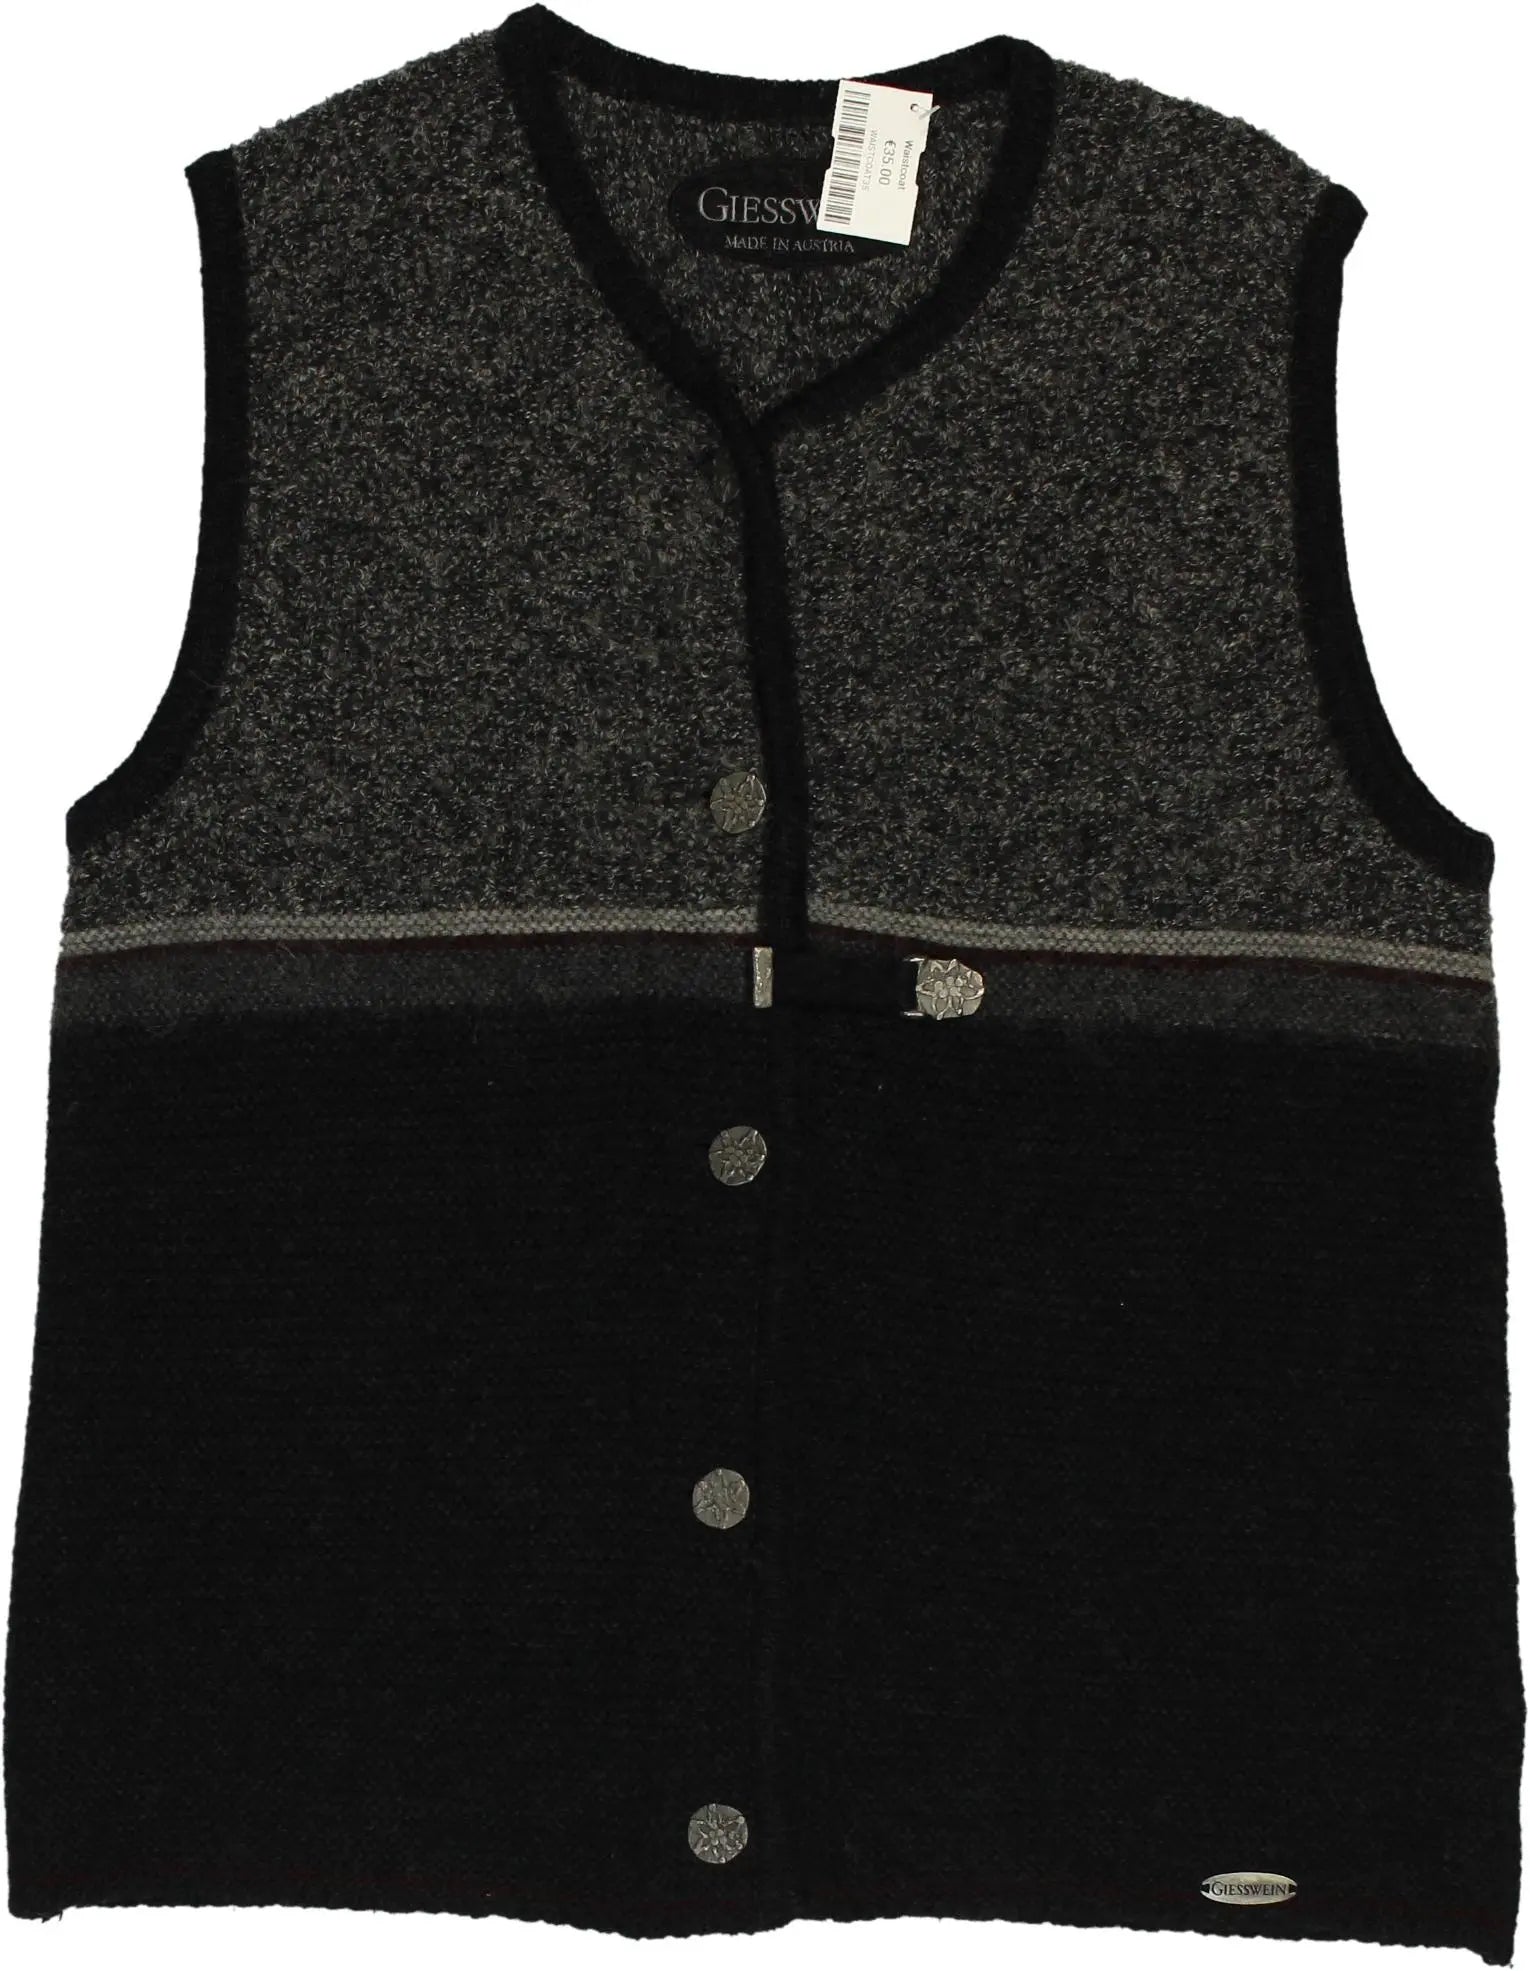 Giesswein - Bavarian Wool Waistcoat- ThriftTale.com - Vintage and second handclothing